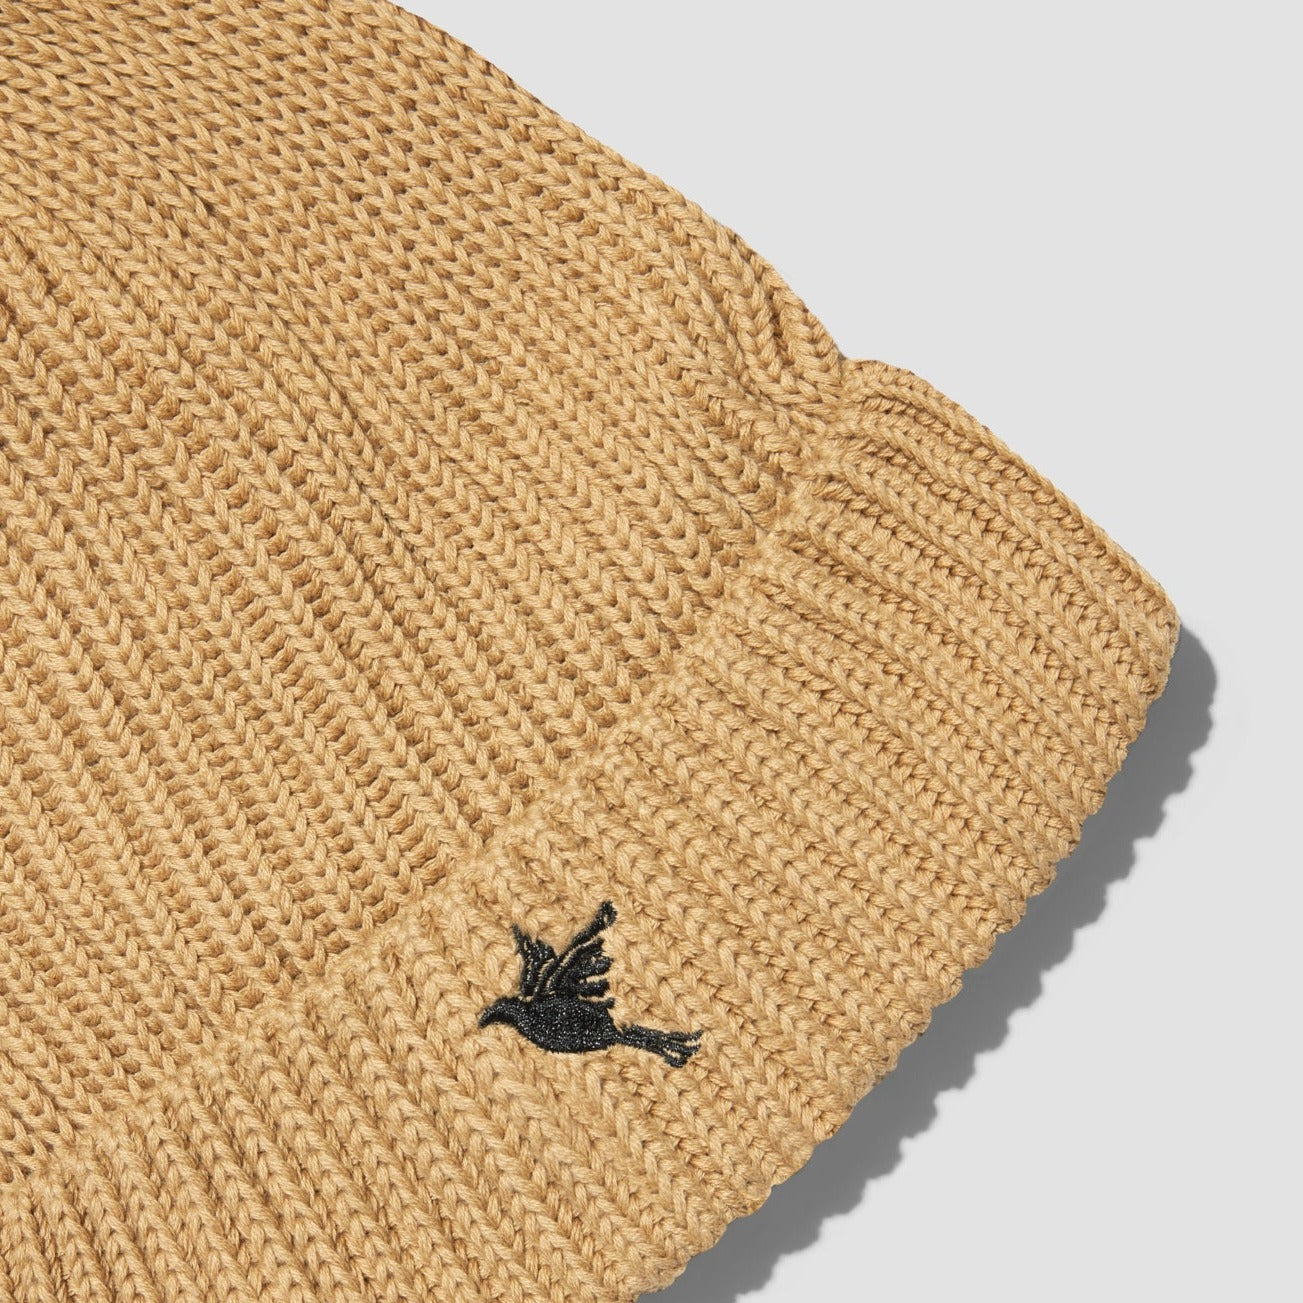 BY TPL ® Beanie Knitted Brown [Black Dove] - The Proper Label ™